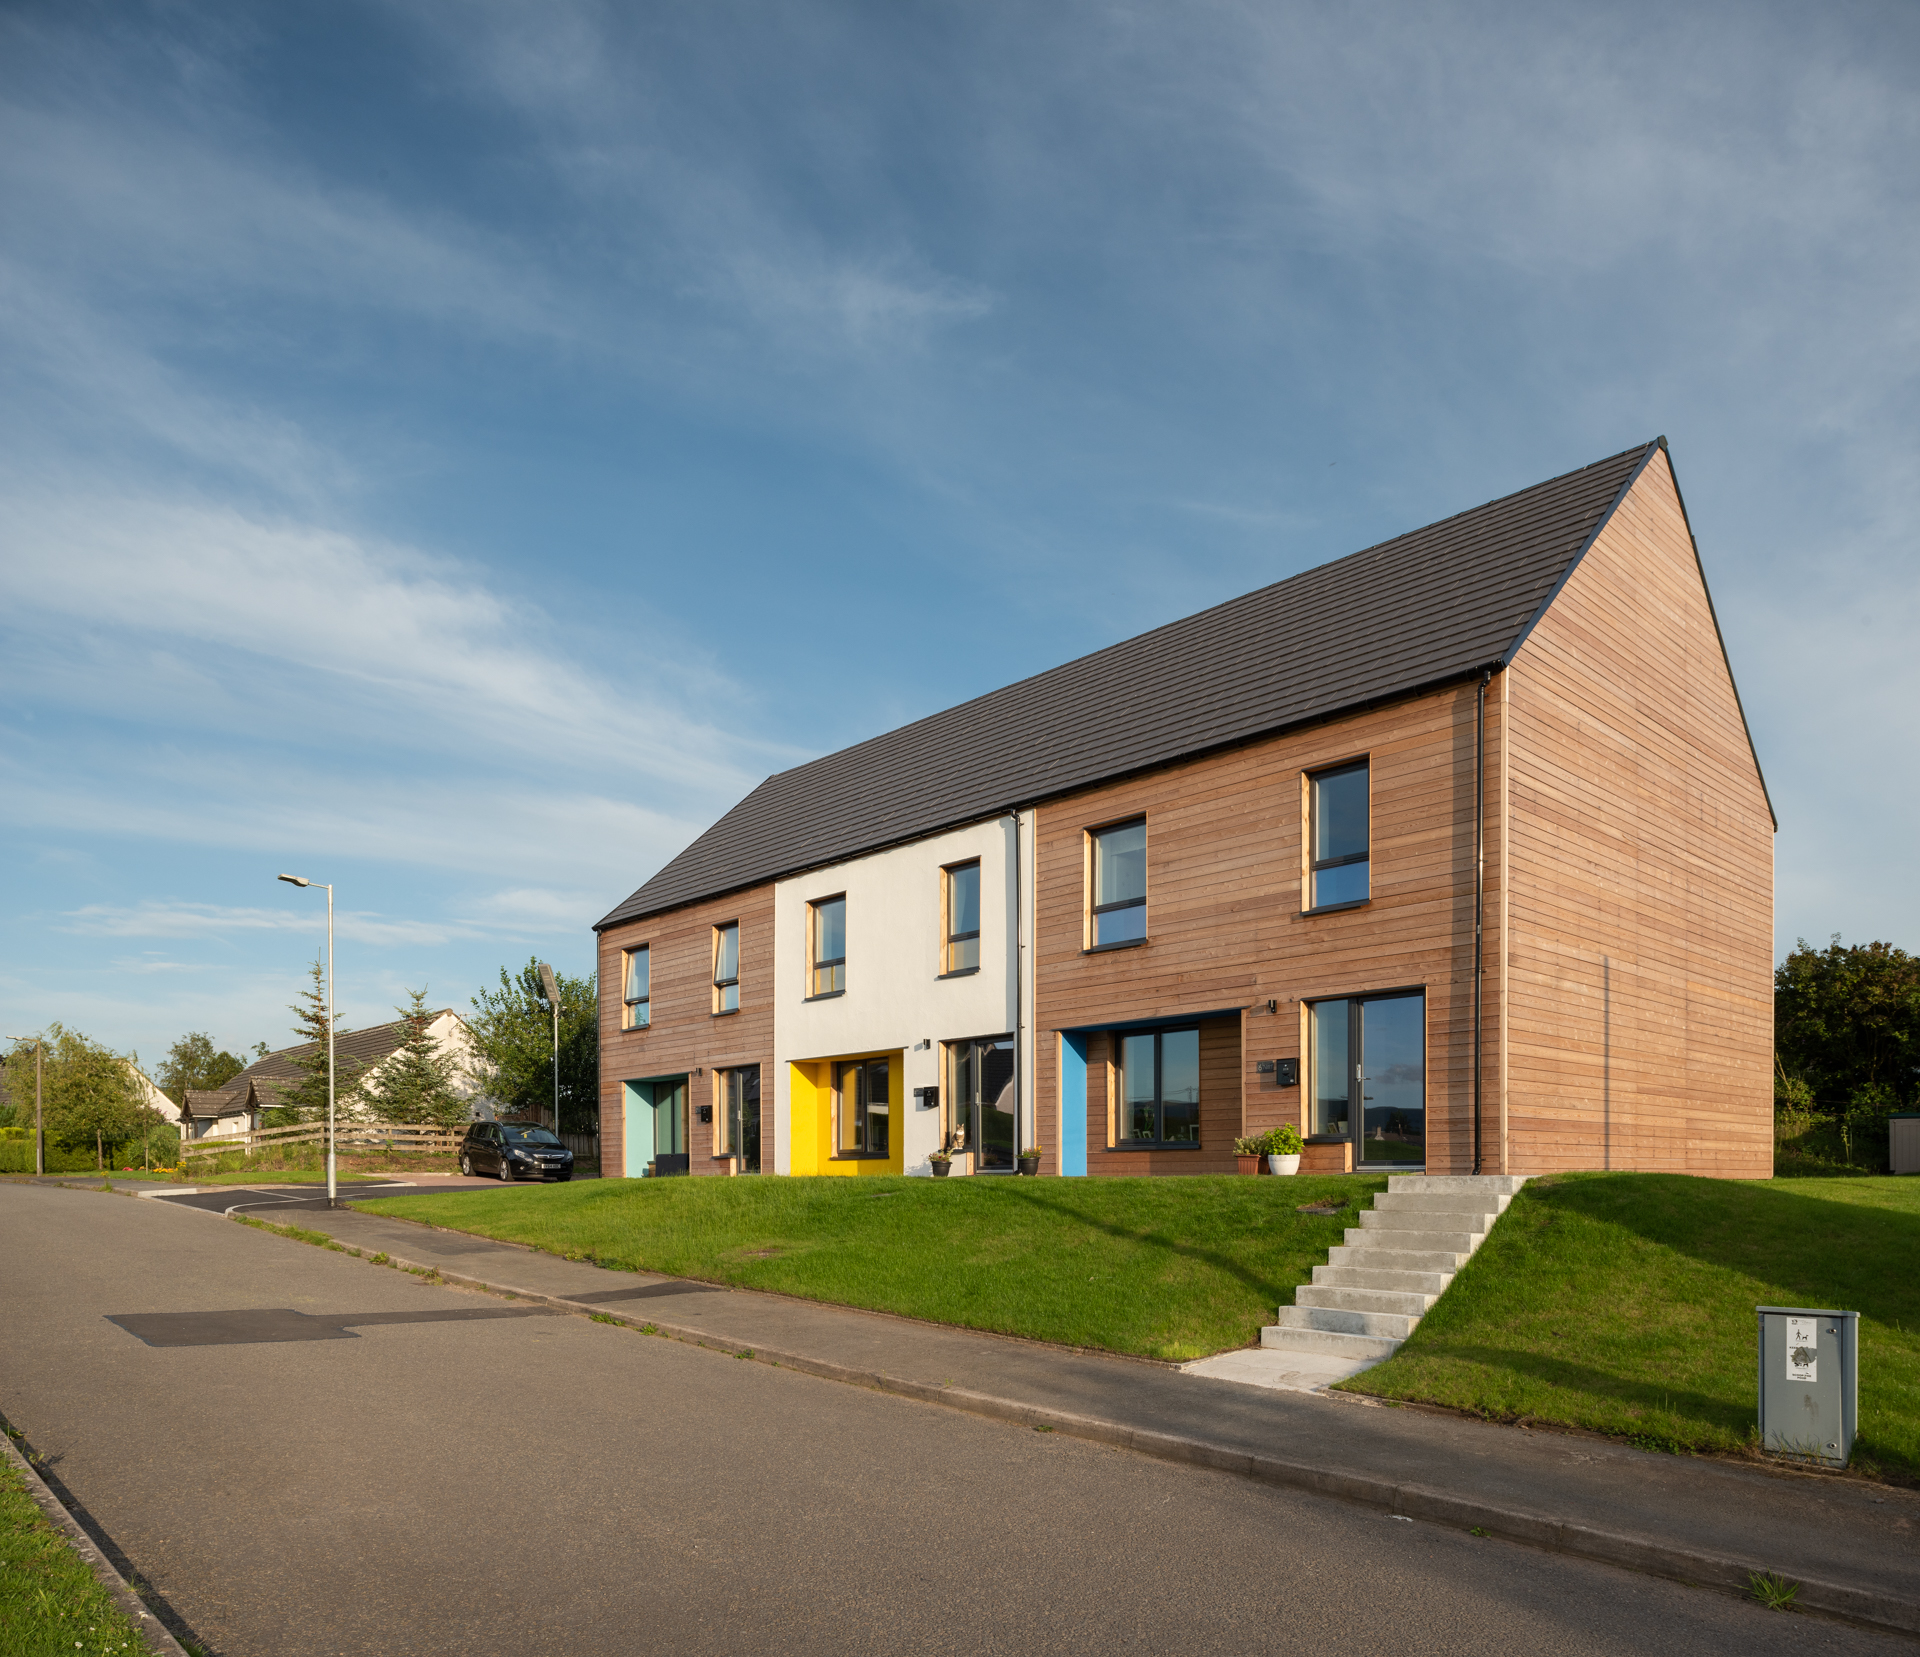 Scotland's first community-owned Passivhaus Certified homes win SURF award